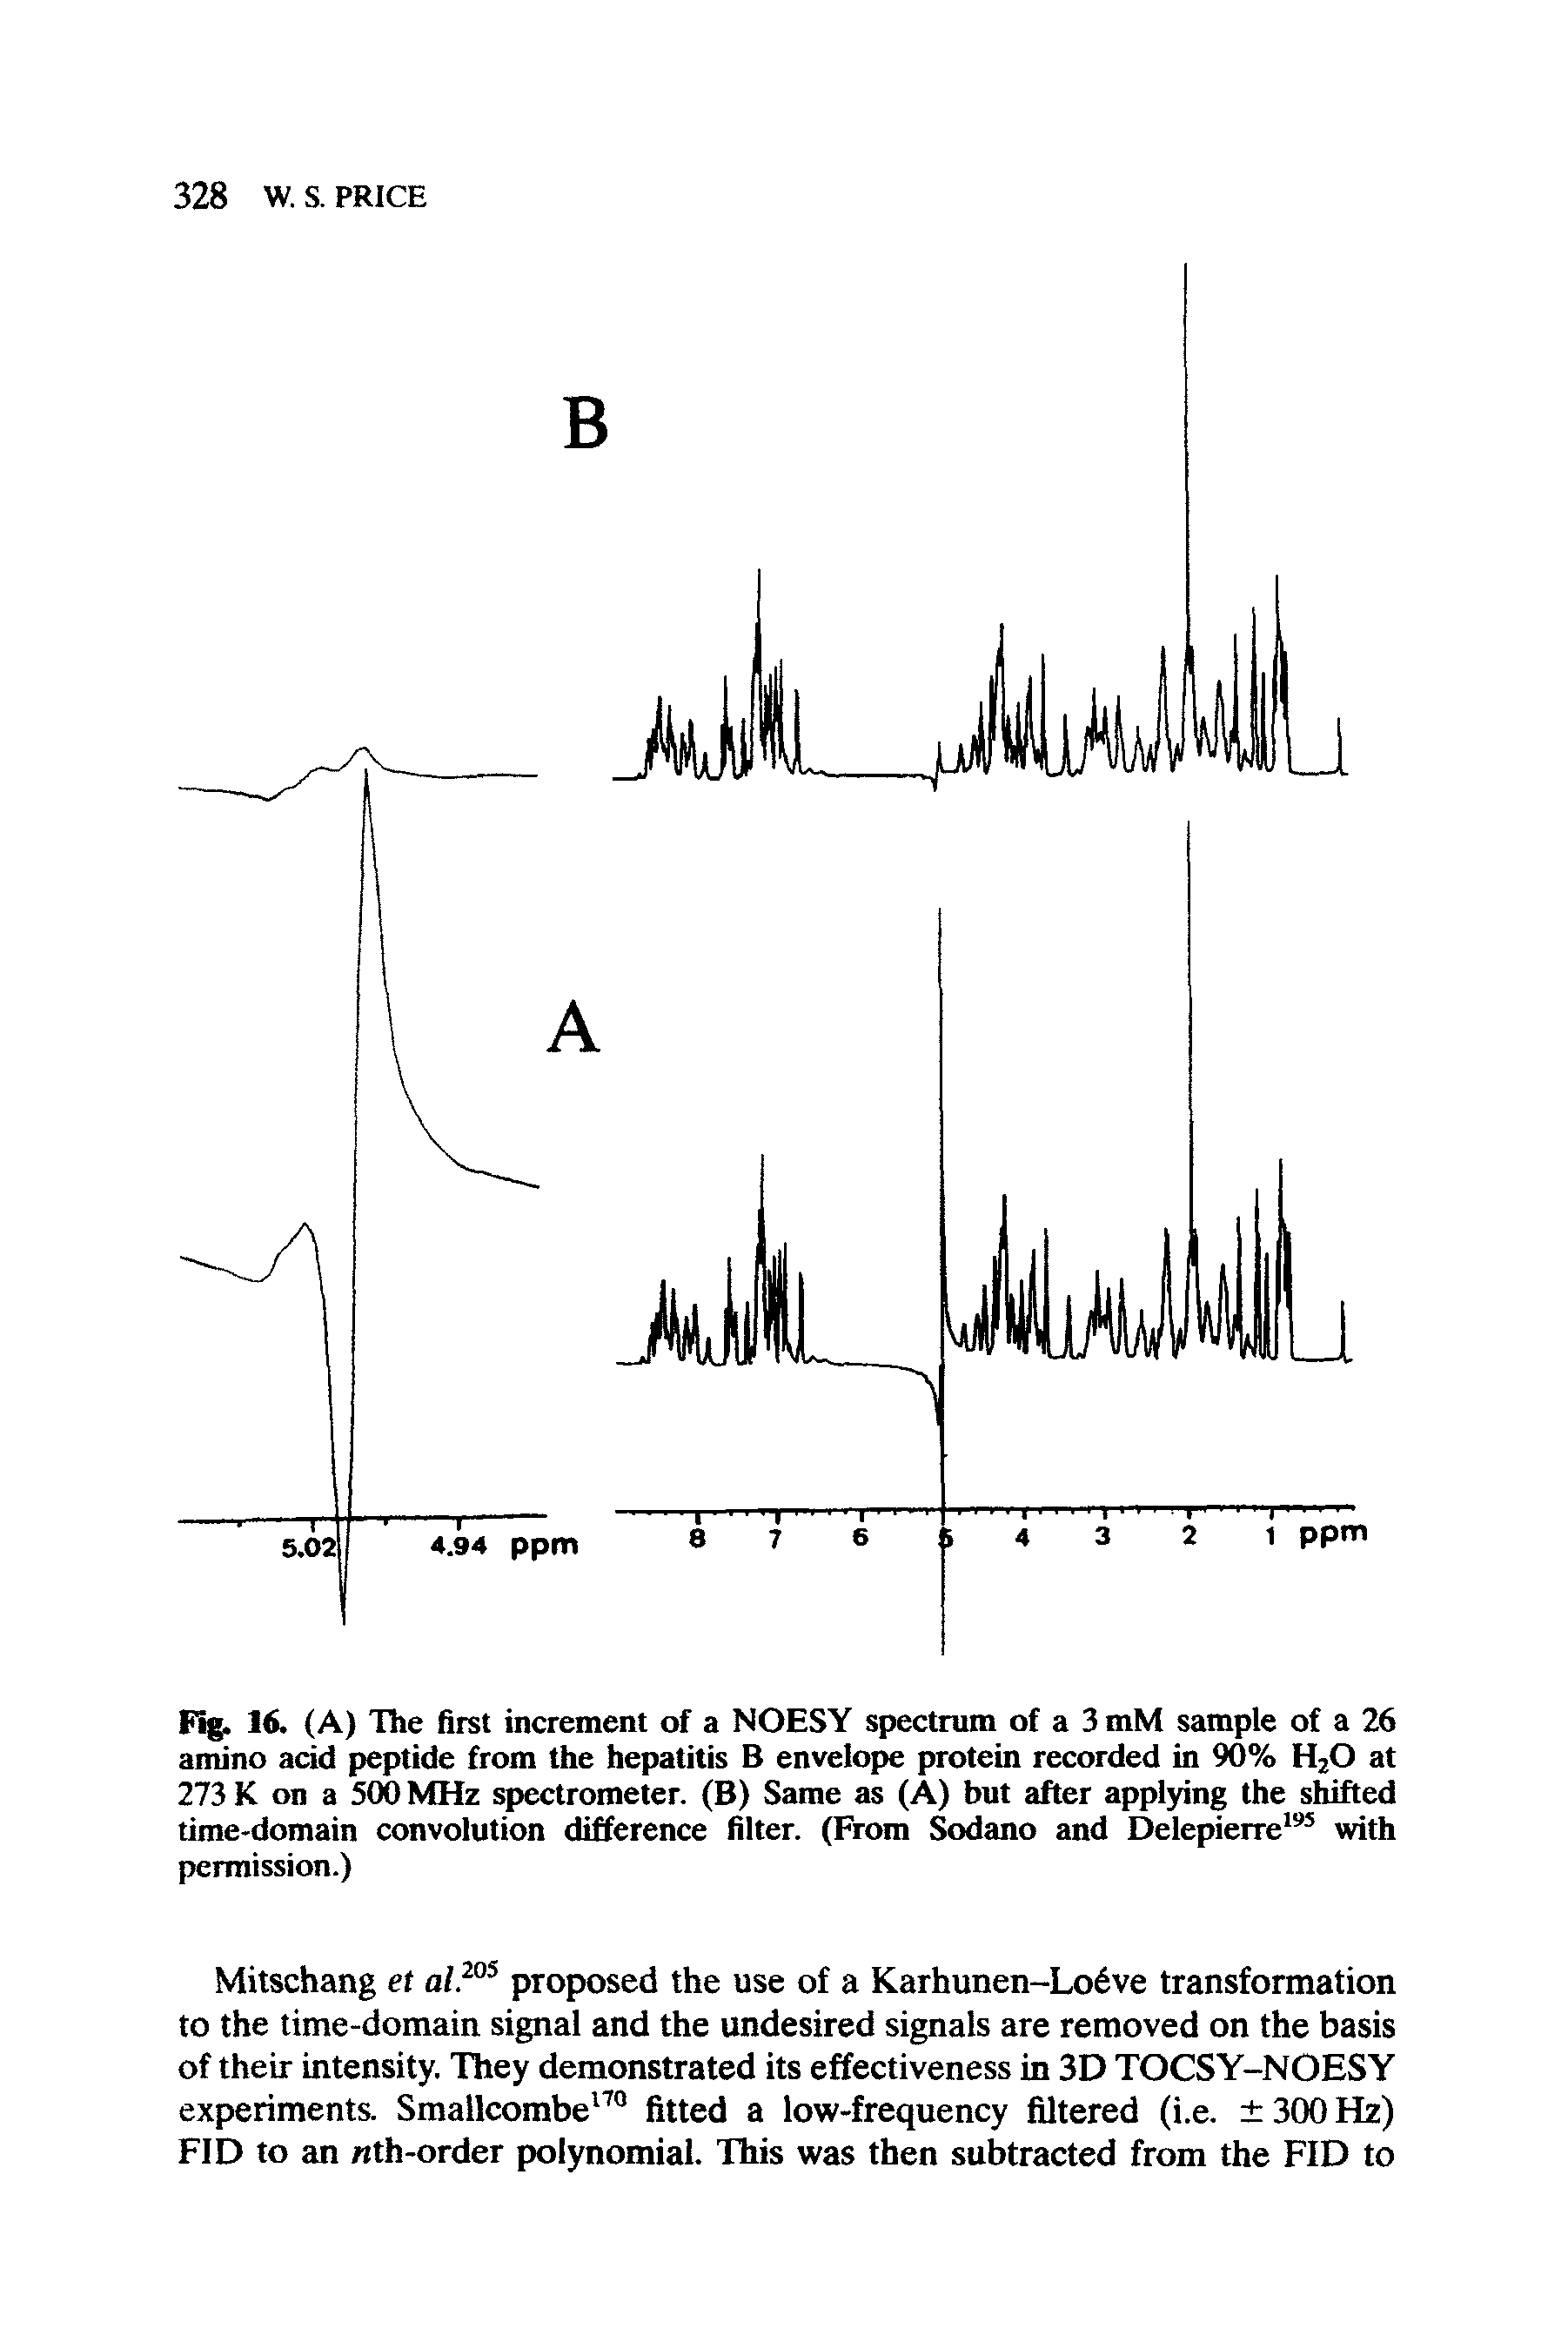 Fig. 16. (A) The first increment of a NOESY spectrum of a 3 mM sample of a 26 amino acid peptide from the hepatitis B envelope protein recorded in 90% H2O at 273 K on a 500 MHz spectrometer. (B) Same as (A) but after applying the shifted time-domain convolution difference filter. (From Sodano and Delepierre with permission.)...